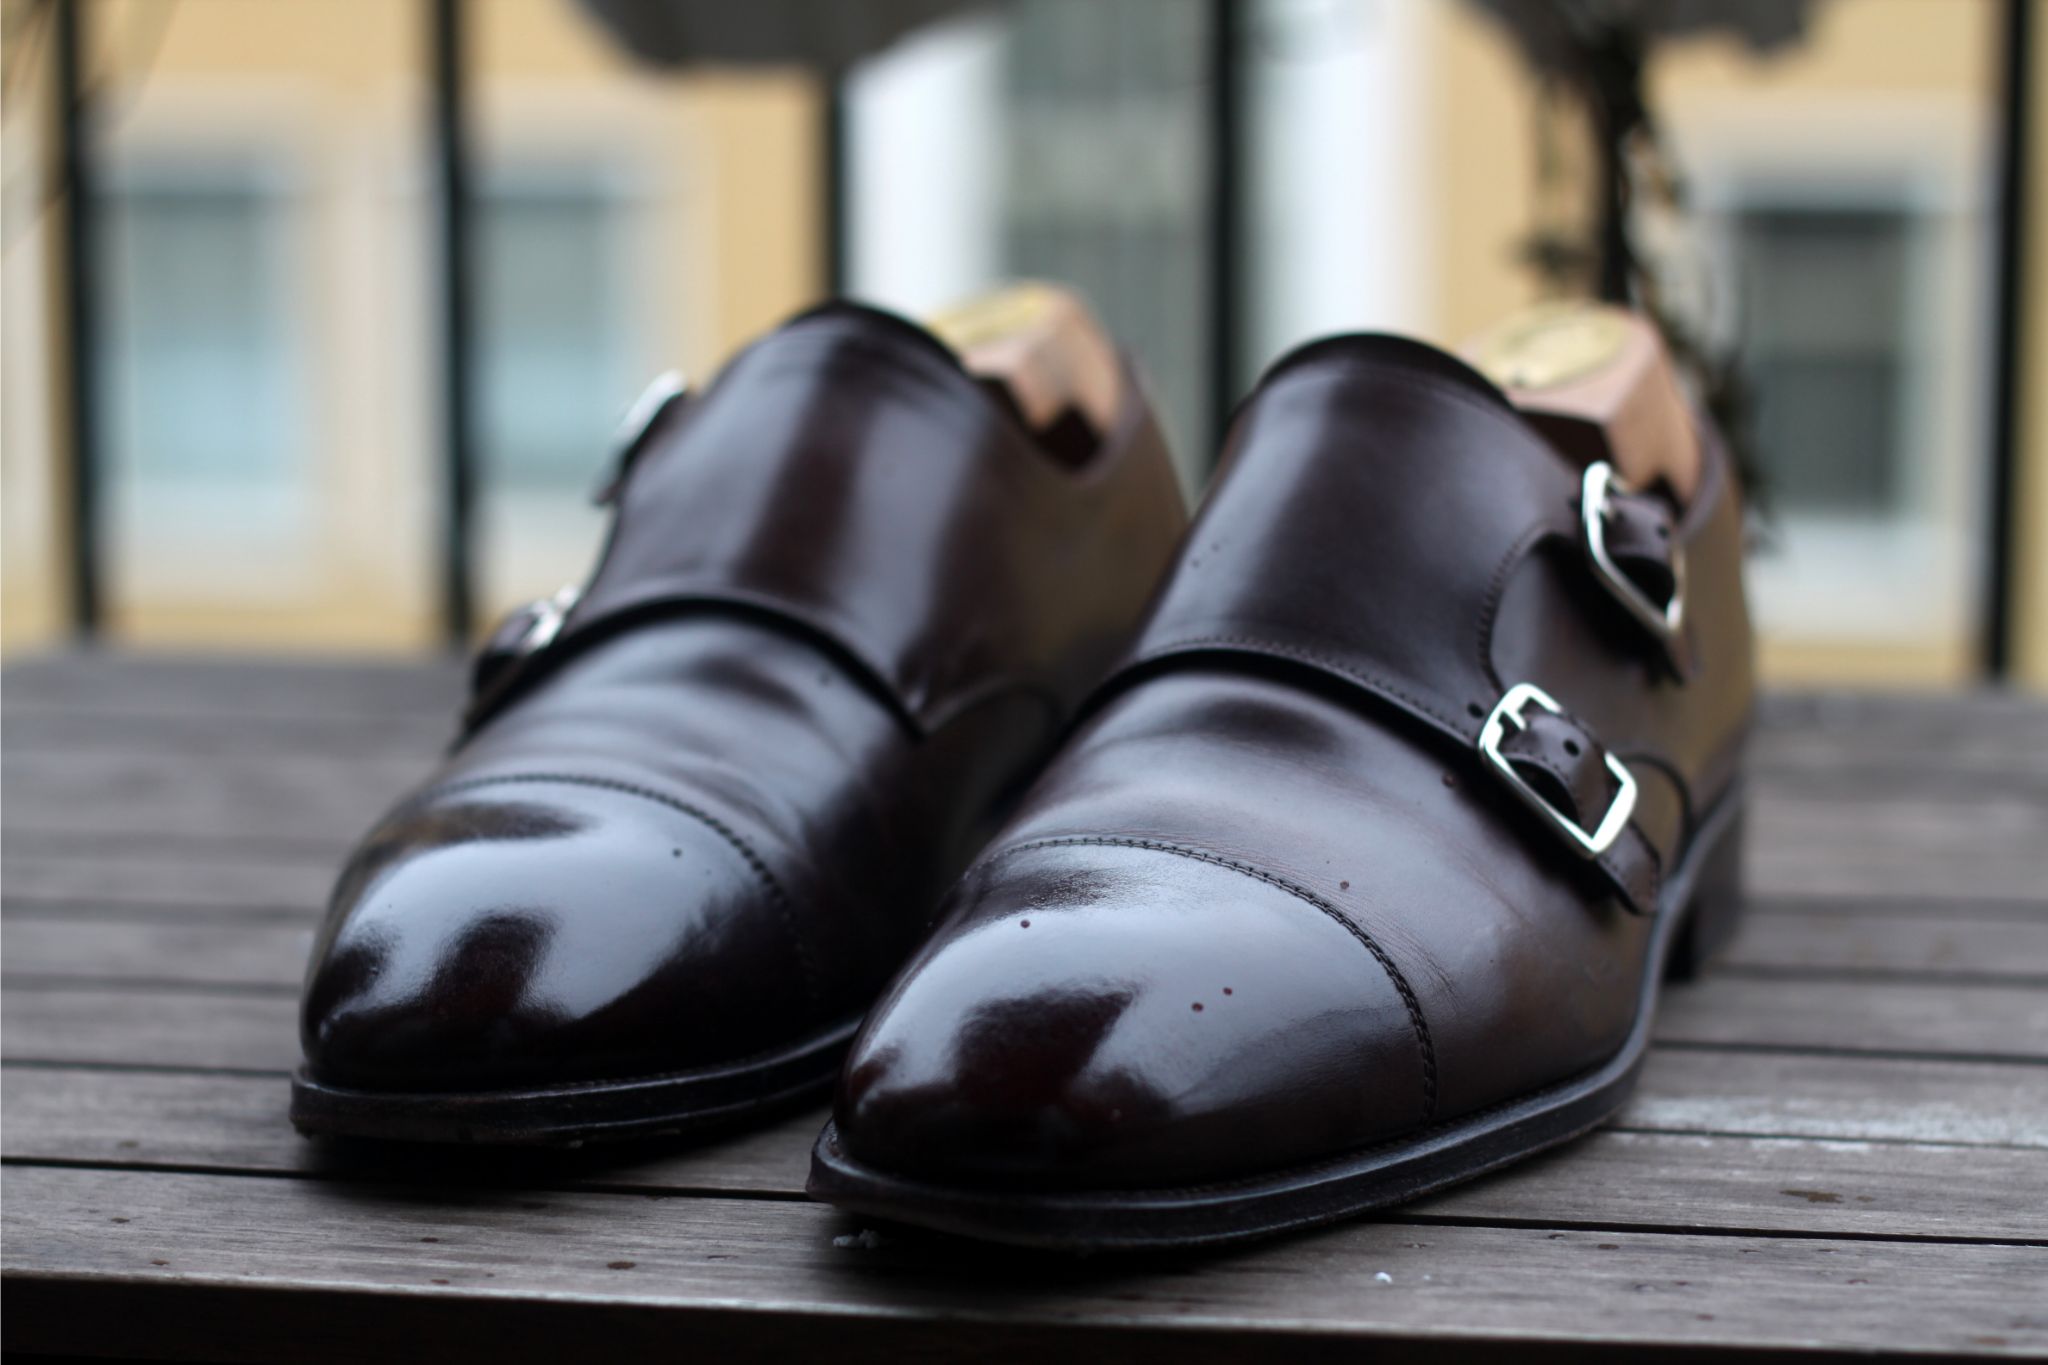 How to take care of your shoes - polished and ready to be worn again